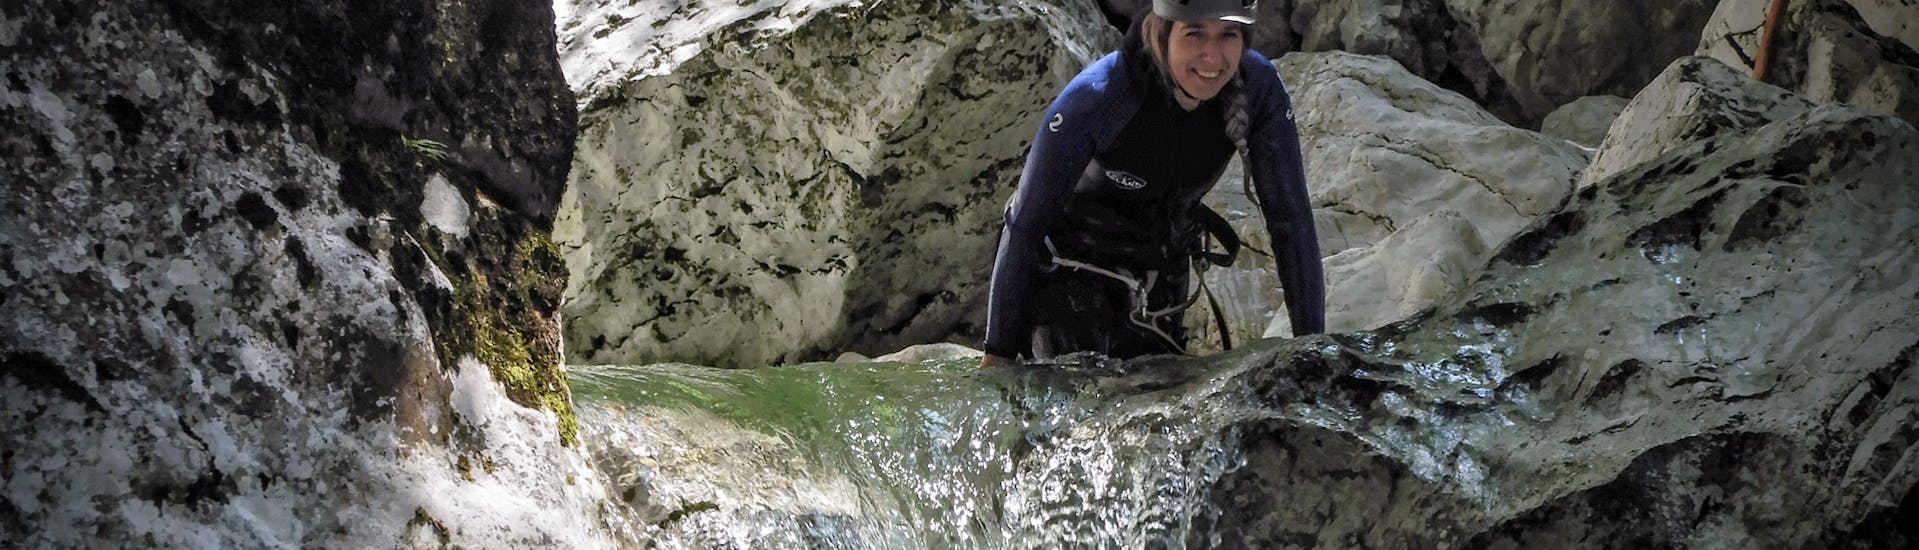 Gevorderde Canyoning in Erl.